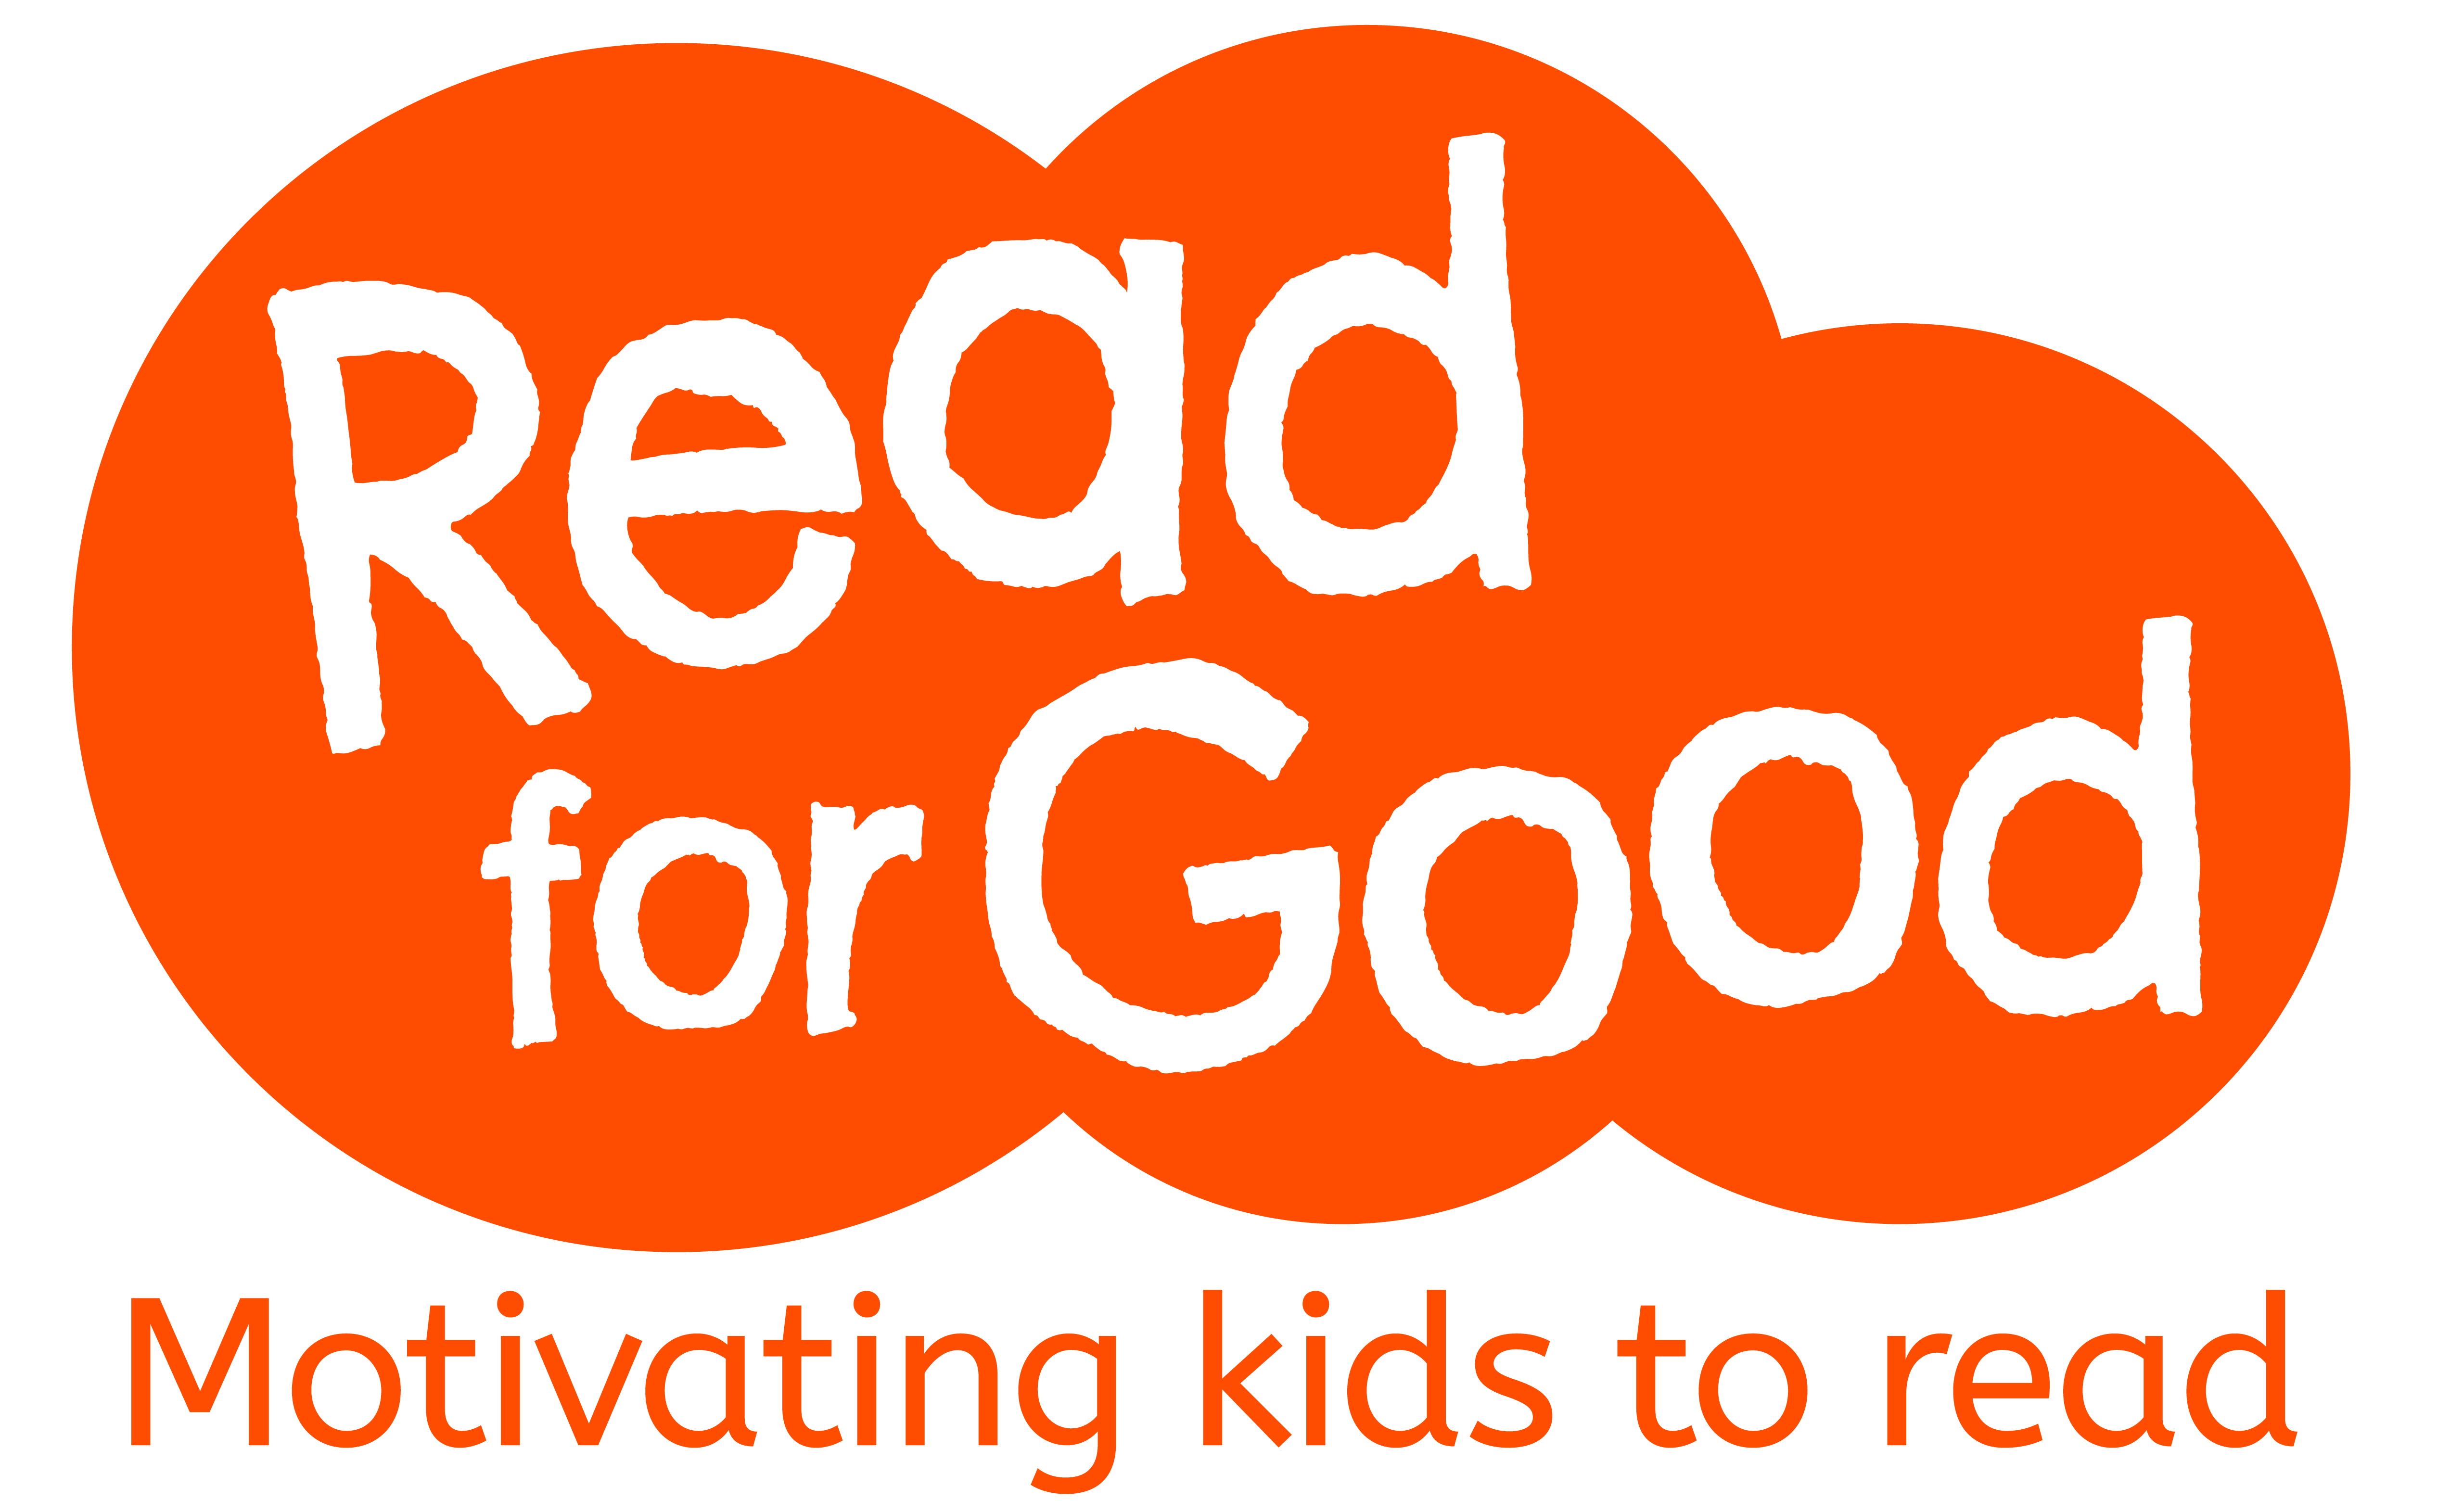 National Book Tokens supports Read for Good, sponsored reading ...